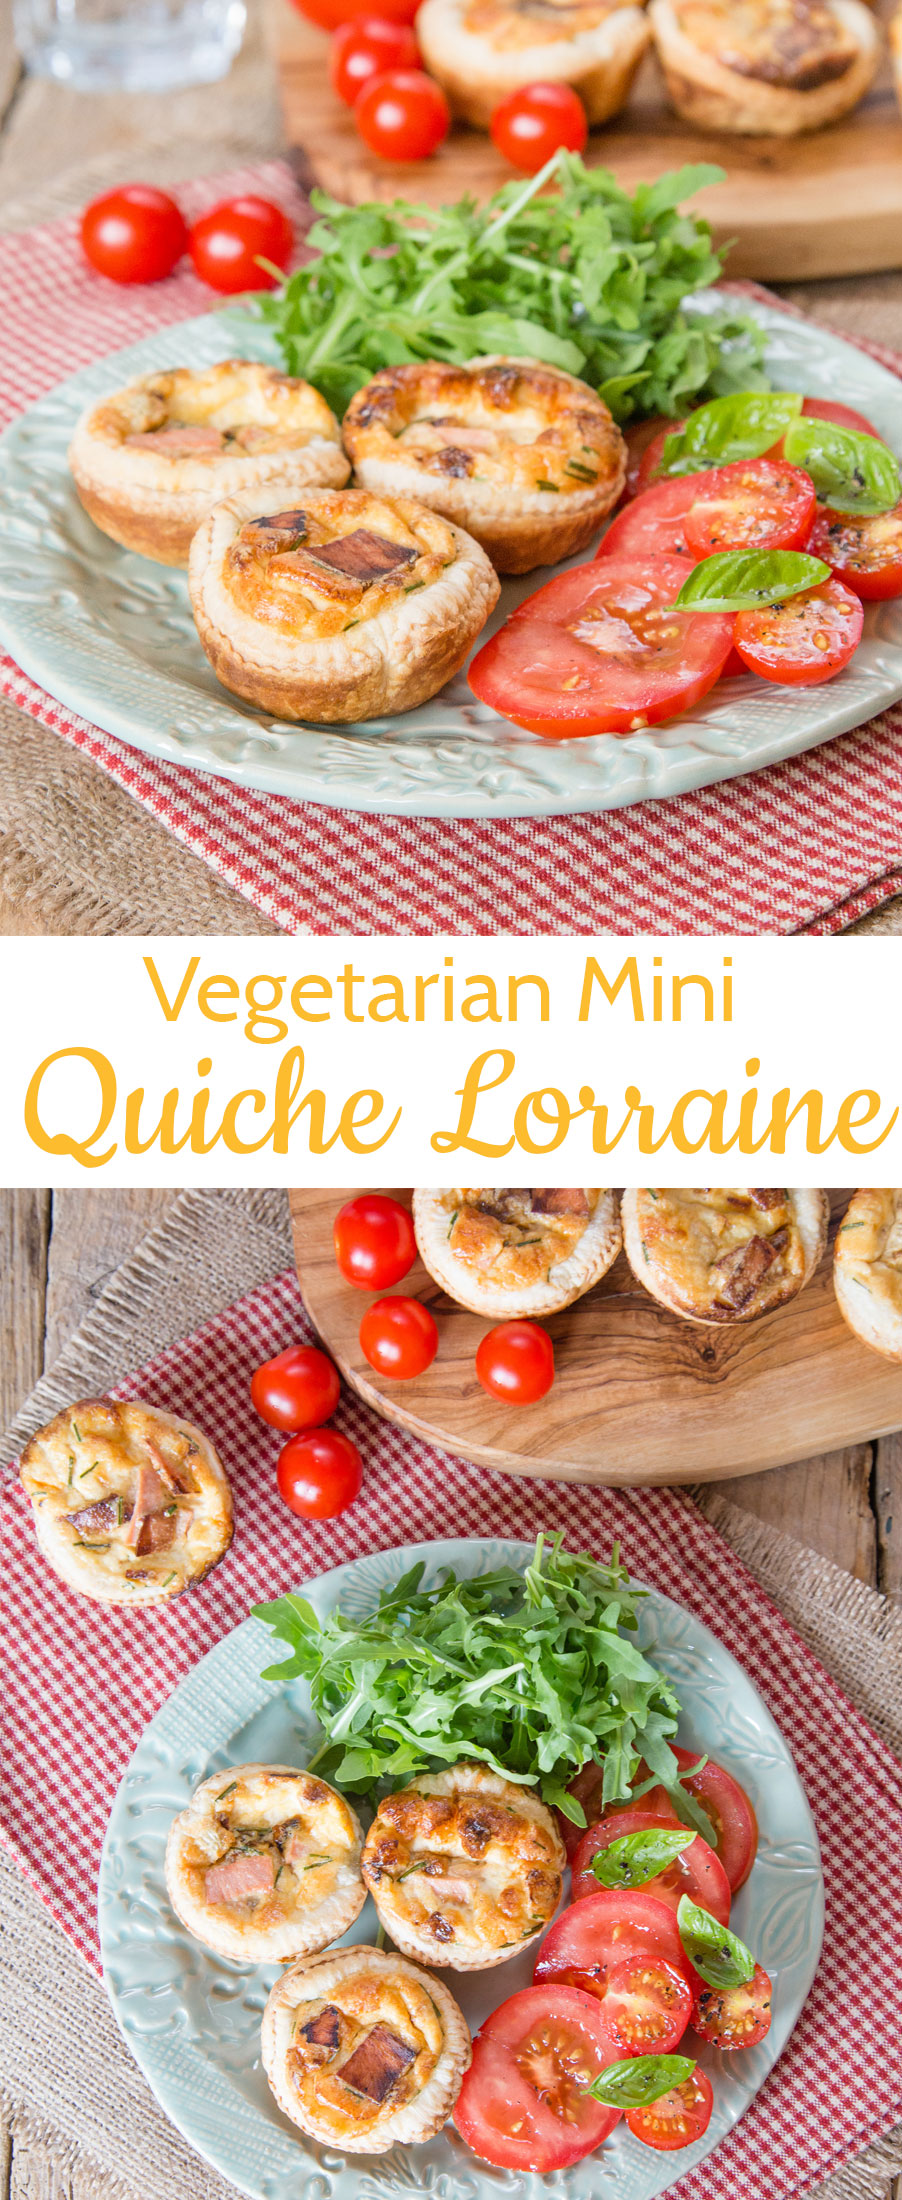 These mini quiche Lorraines are made with vegetarian bacon rashers! They are deliciously perfect for picnics and packed lunches, and suitable for the whole family.